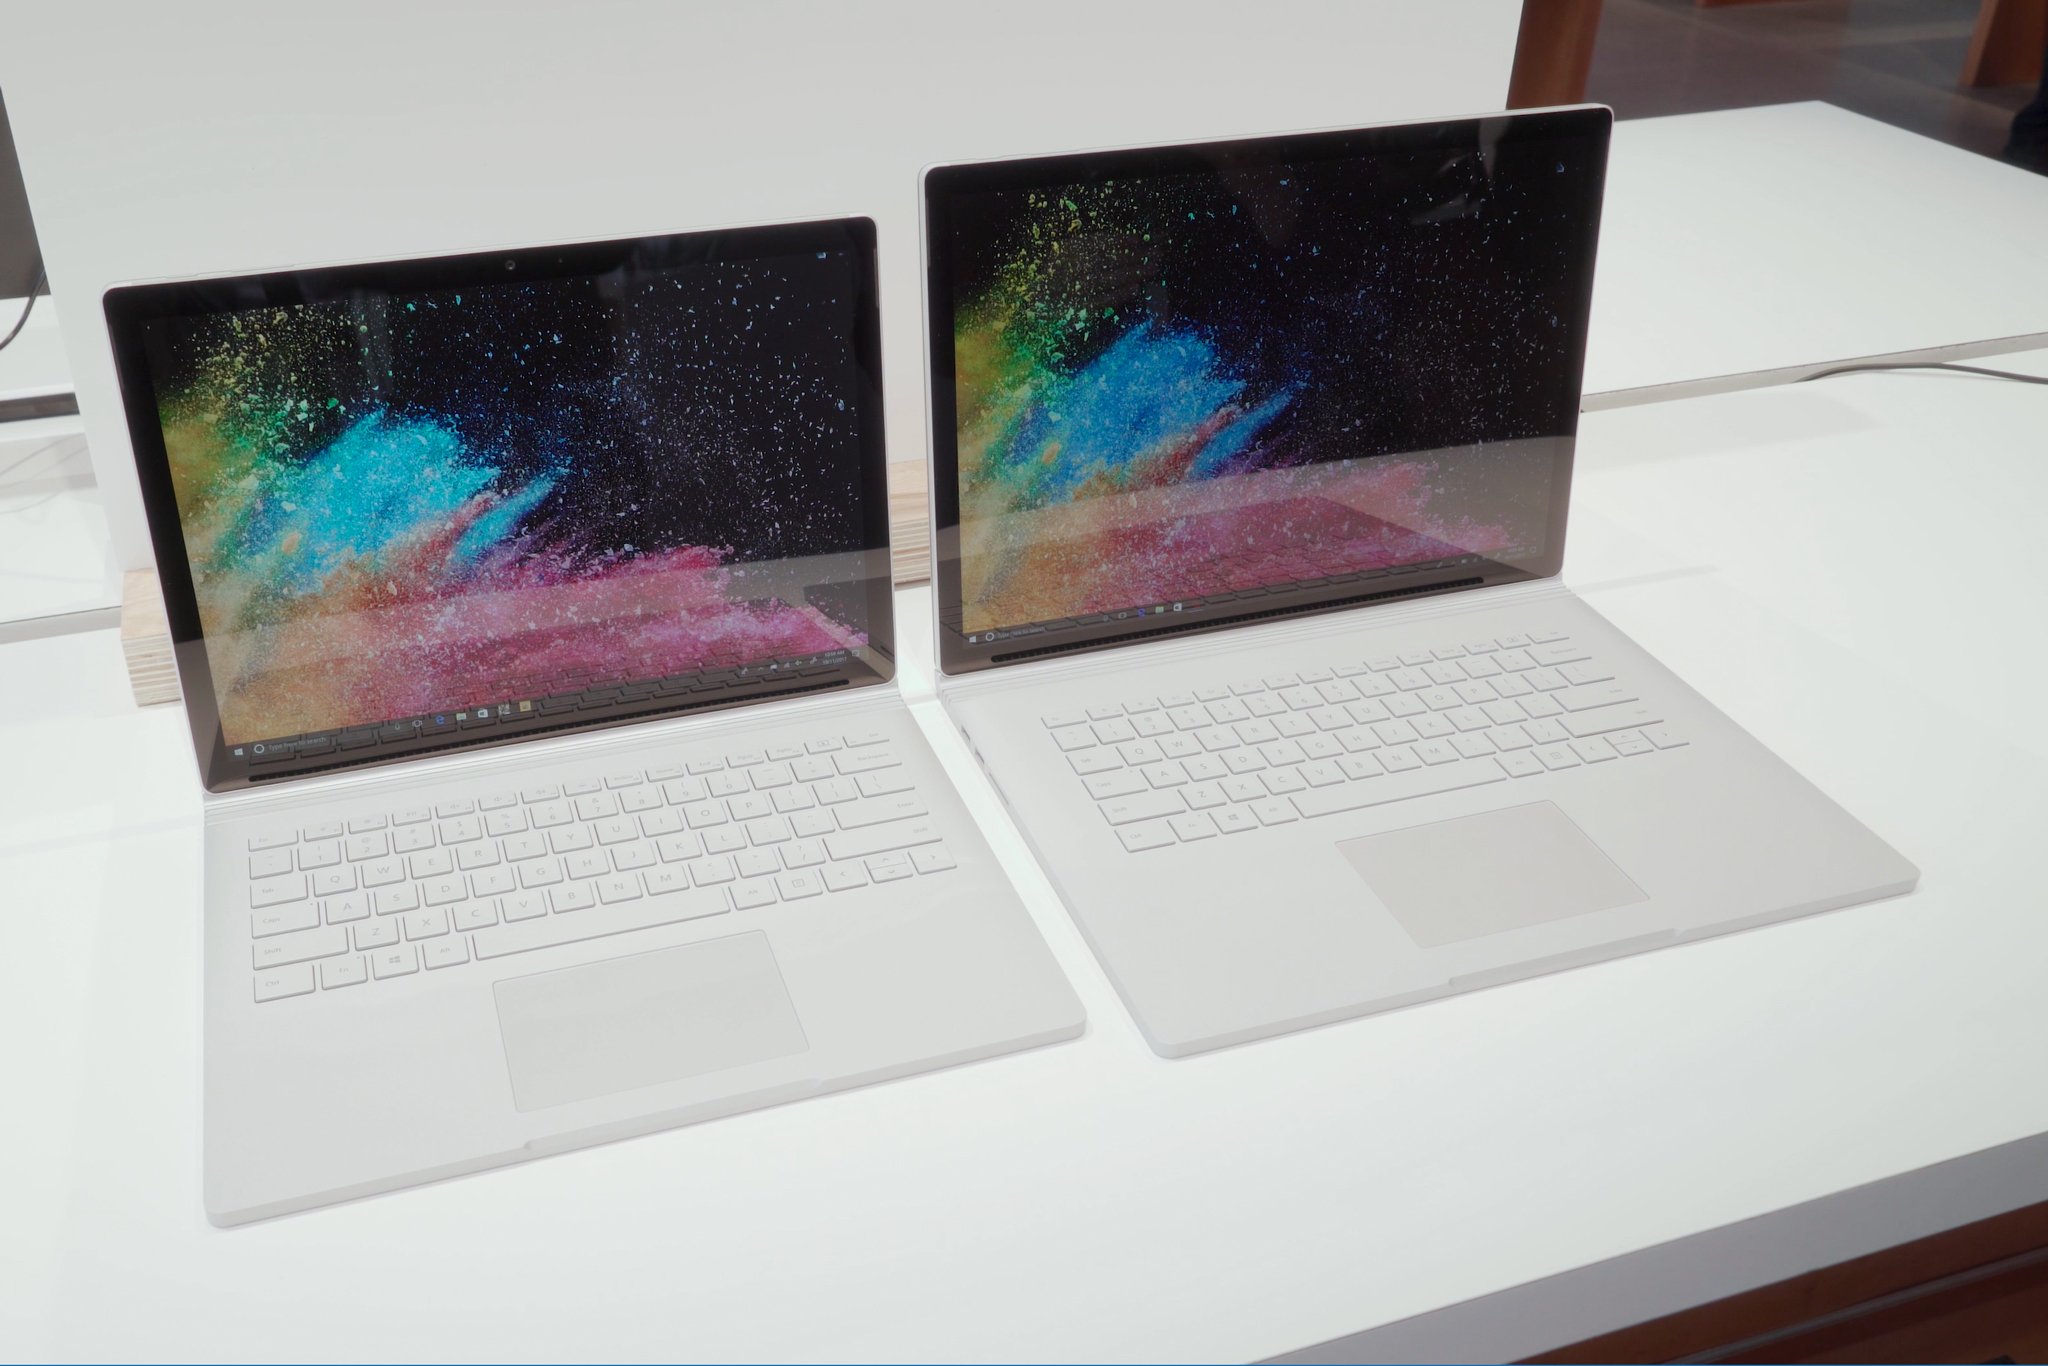 Chime in: Do you prefer the 13-inch or 15-inch Surface Book 2?